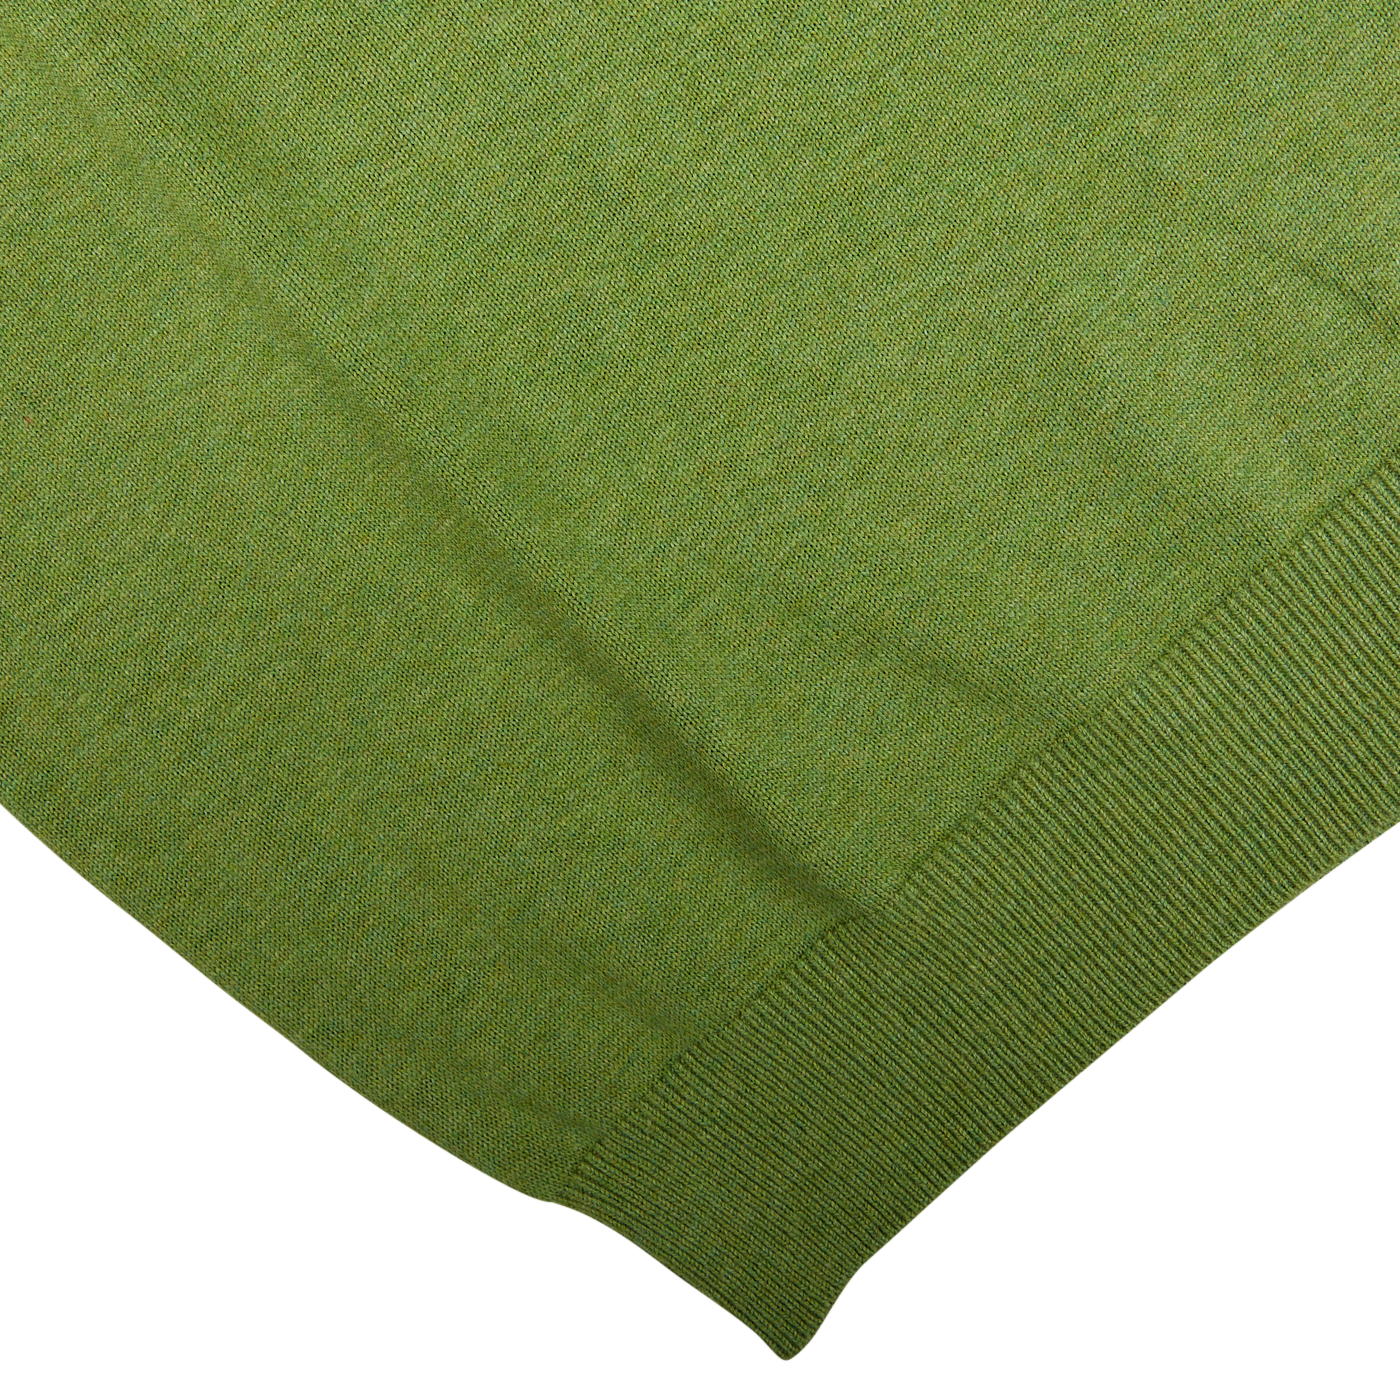 Avocado Green Luxury Cotton Crewneck with ribbed hem by Alan Paine on a white surface.